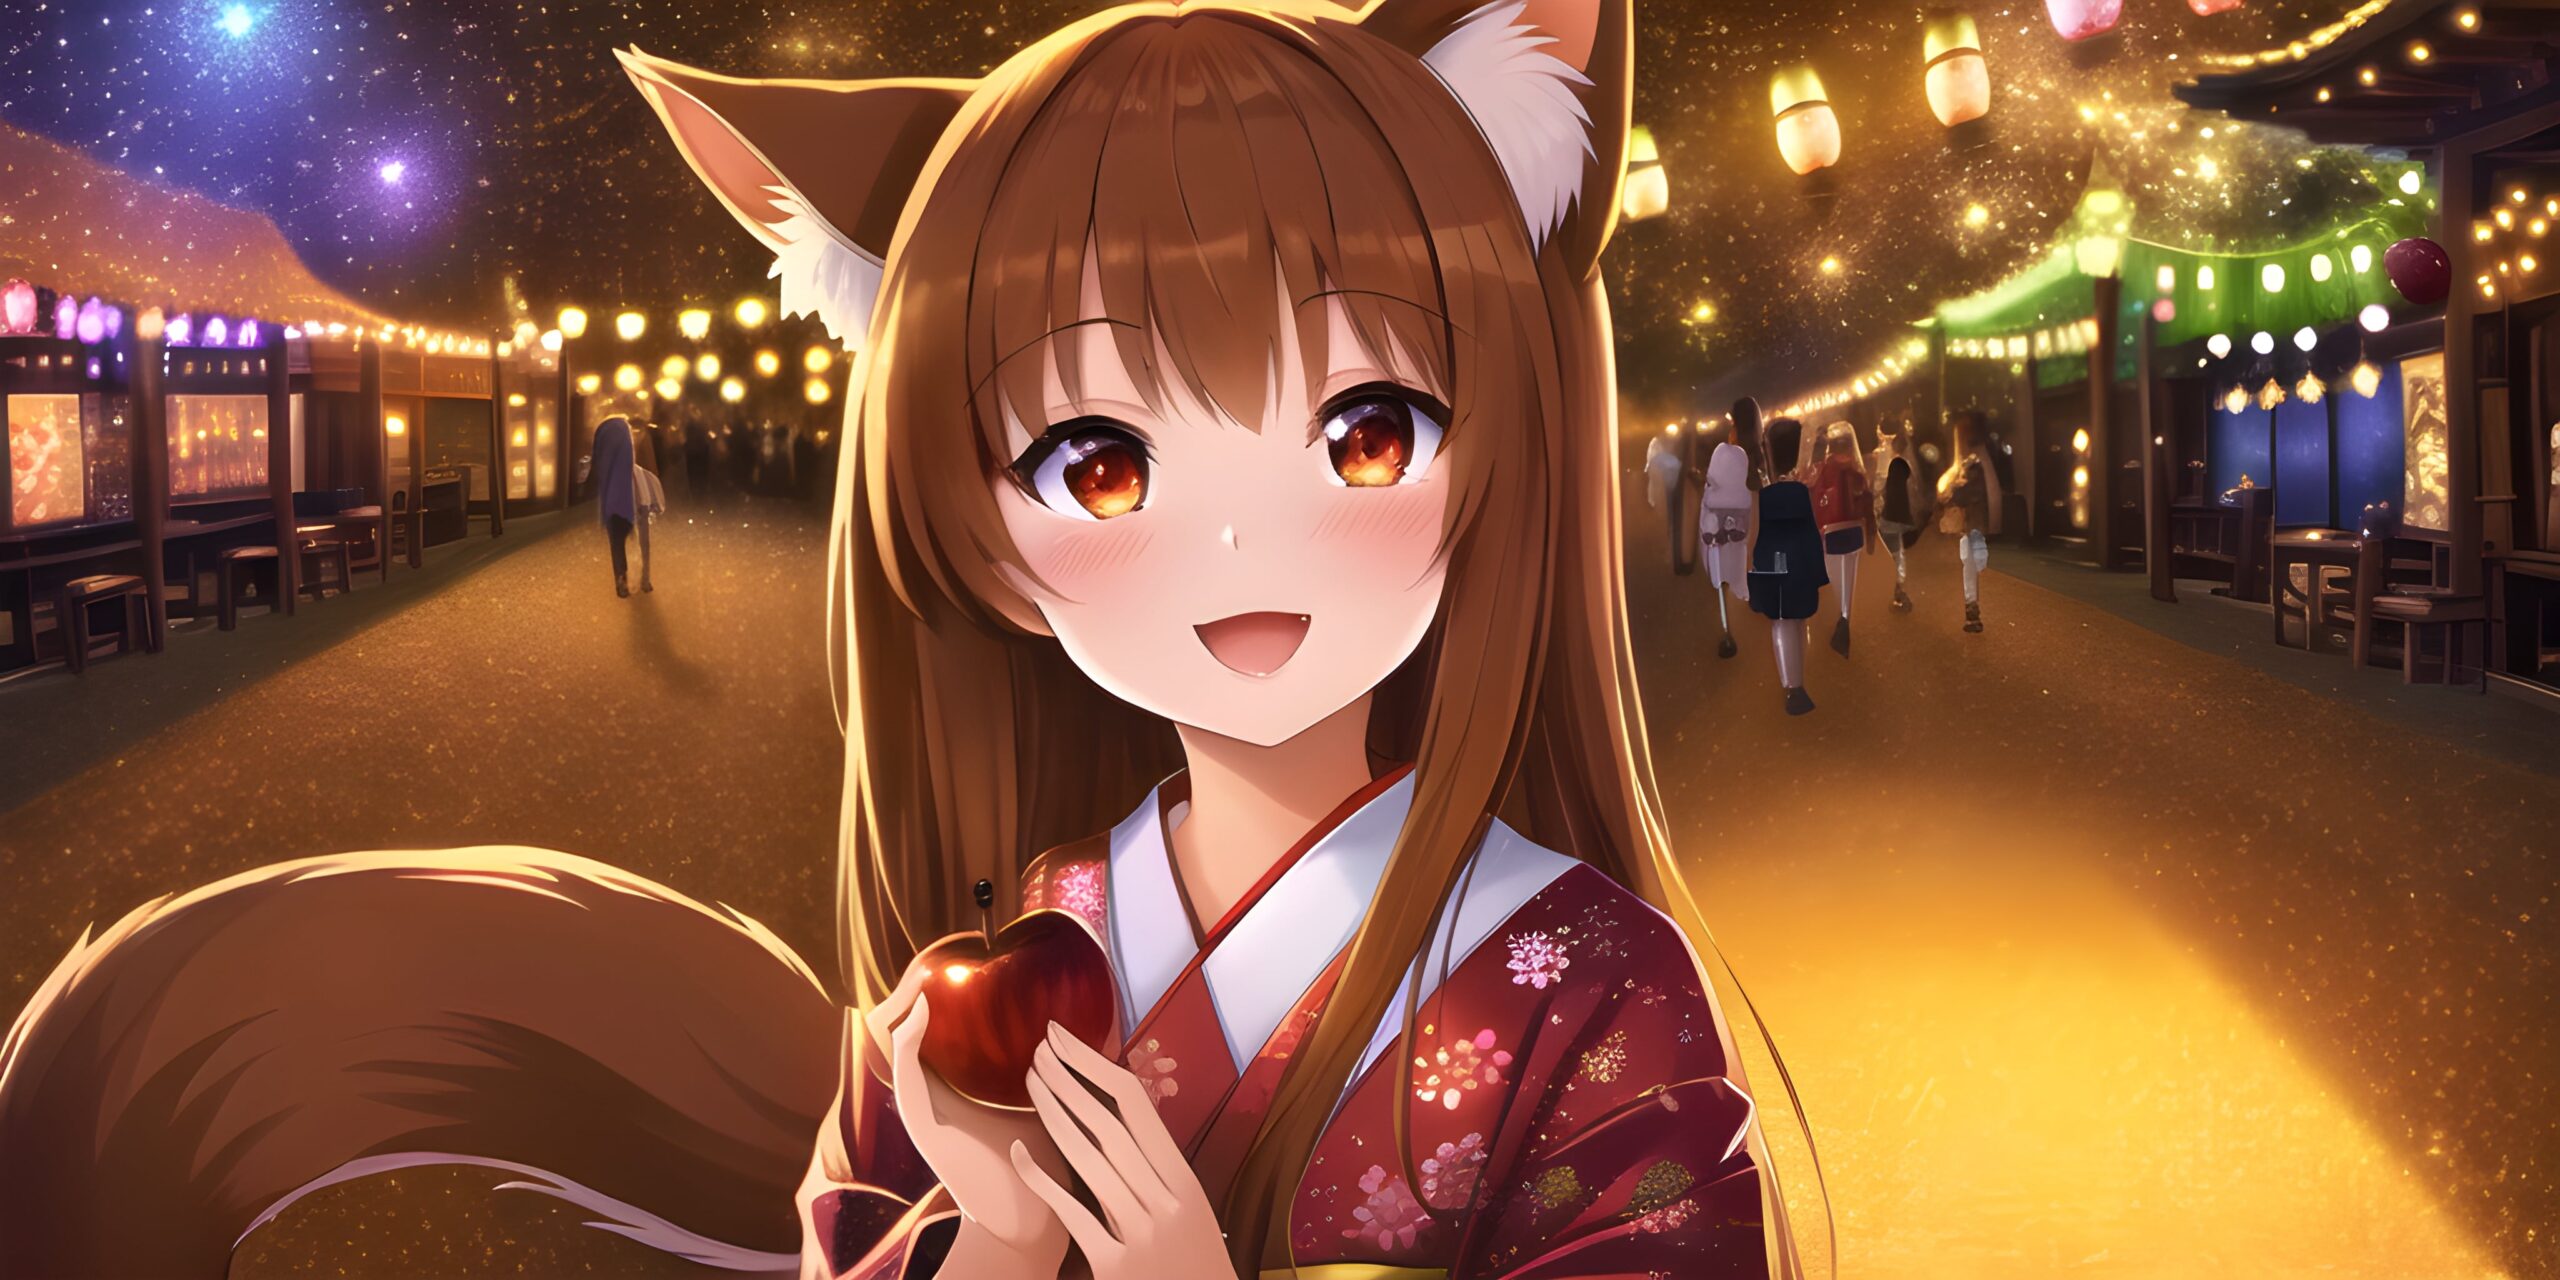 Holo at the Summer Festival